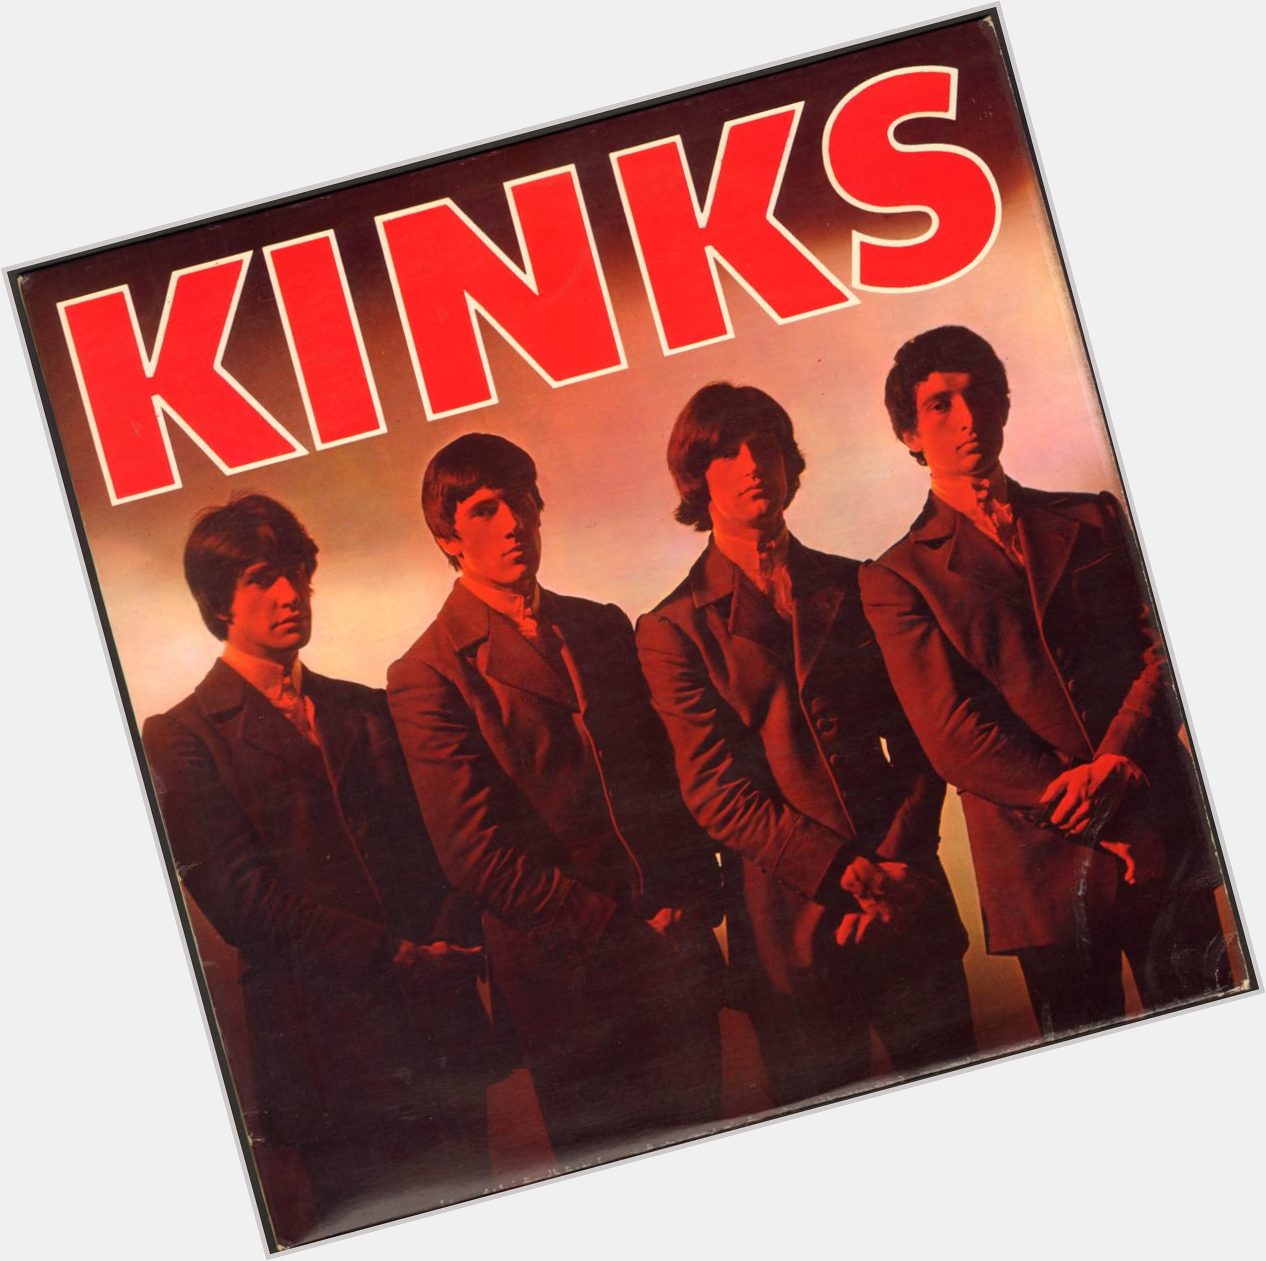 Happy Birthday Mick Avory, the longtime drummer and percussionist for the Kinks. 